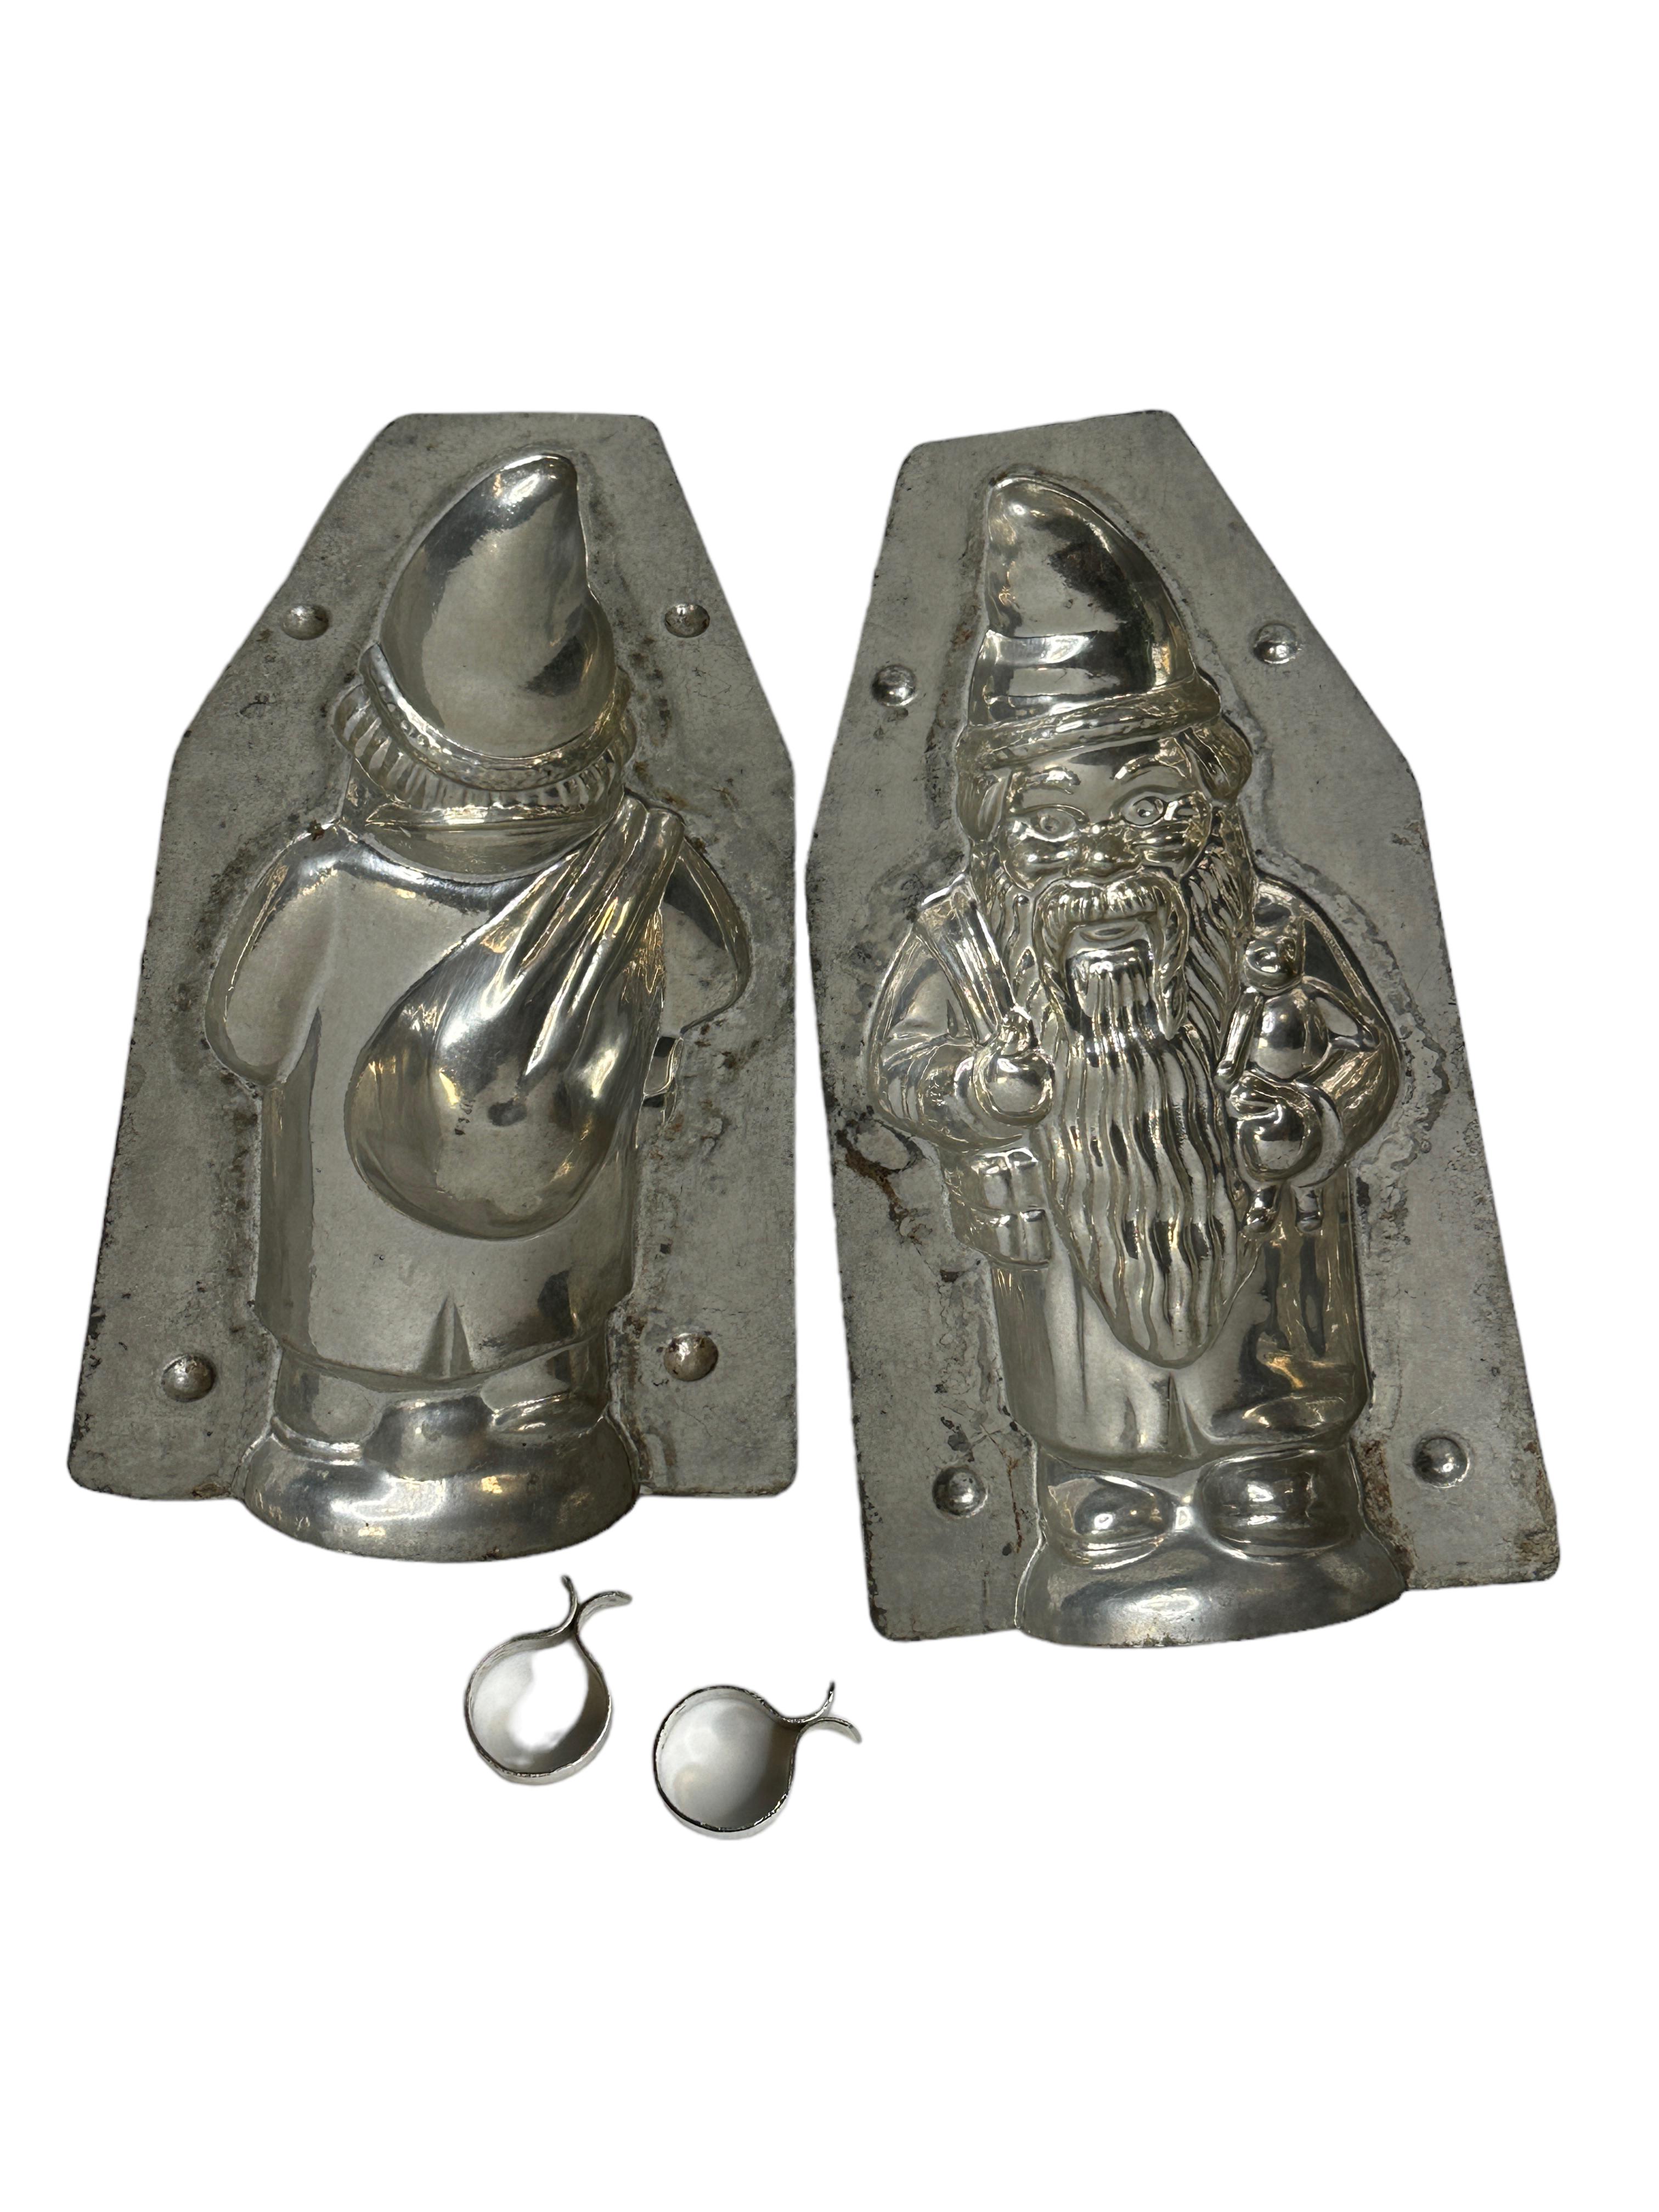 Metal Santa Claus Christmas Chocolate Mold Antique 1920s, Germany For Sale